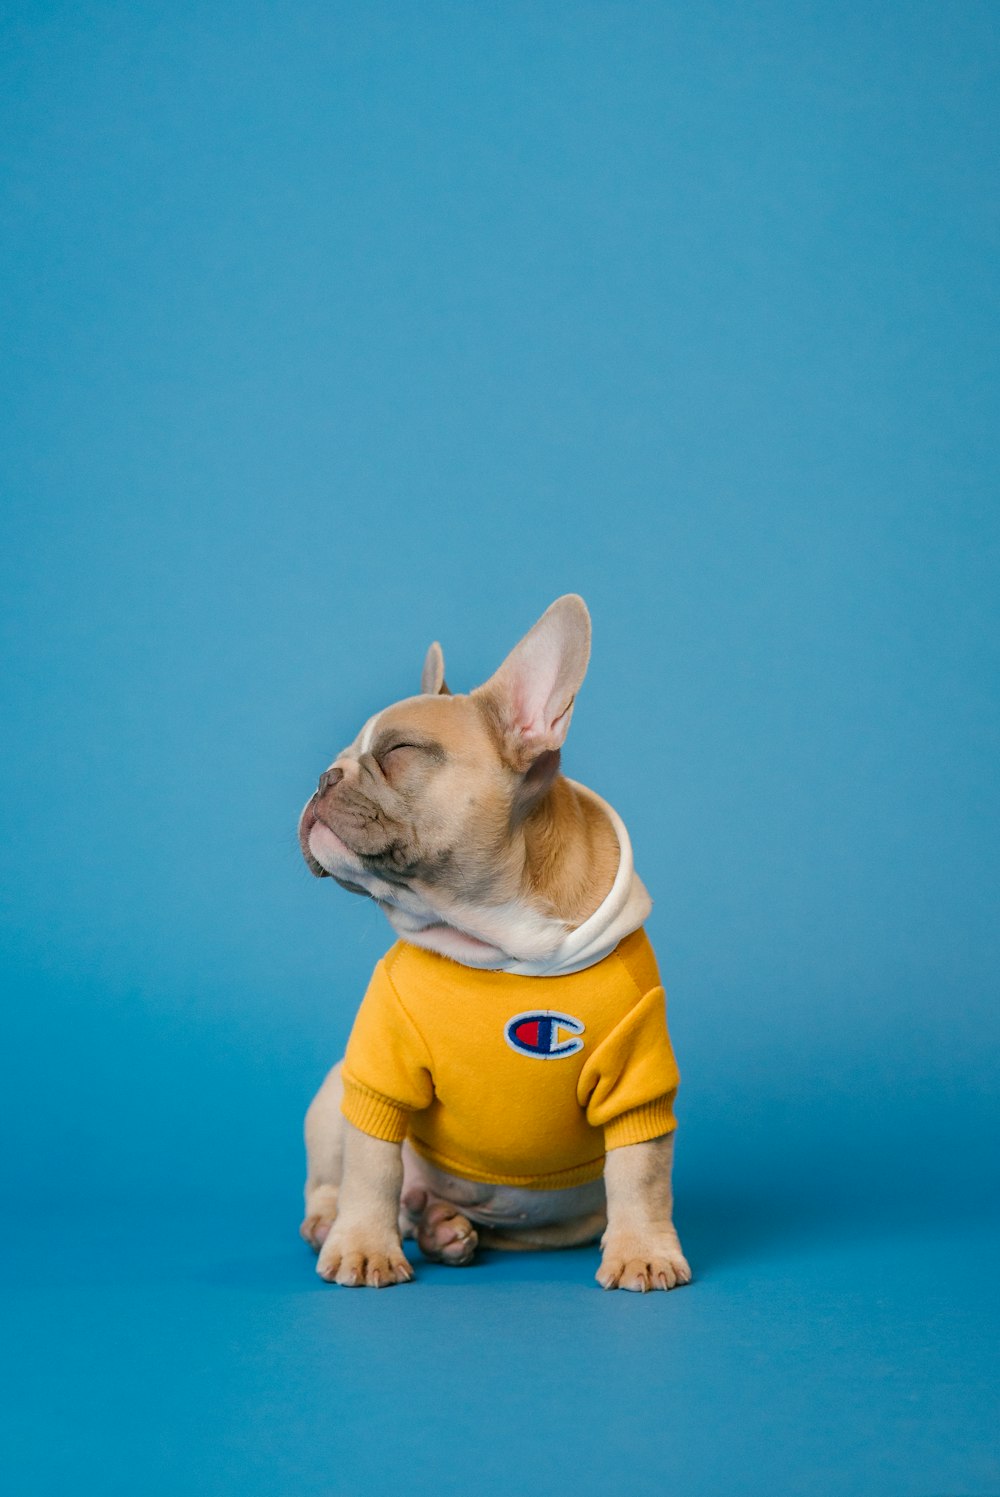 a small dog wearing a yellow shirt on a blue background